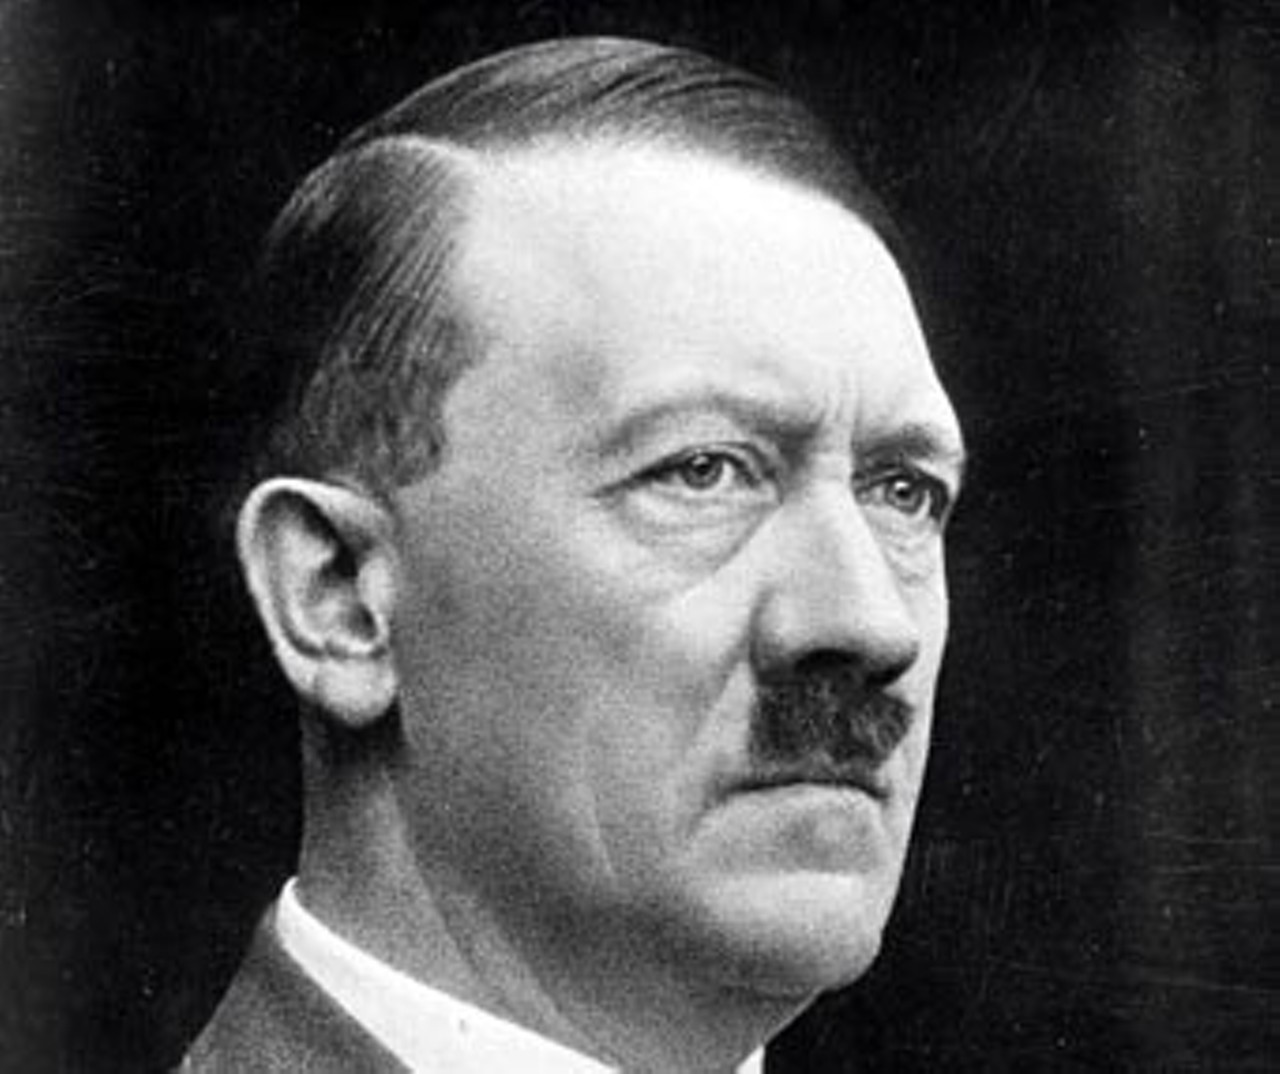 Hitler ruined the tiny mustache for, well, everyone.